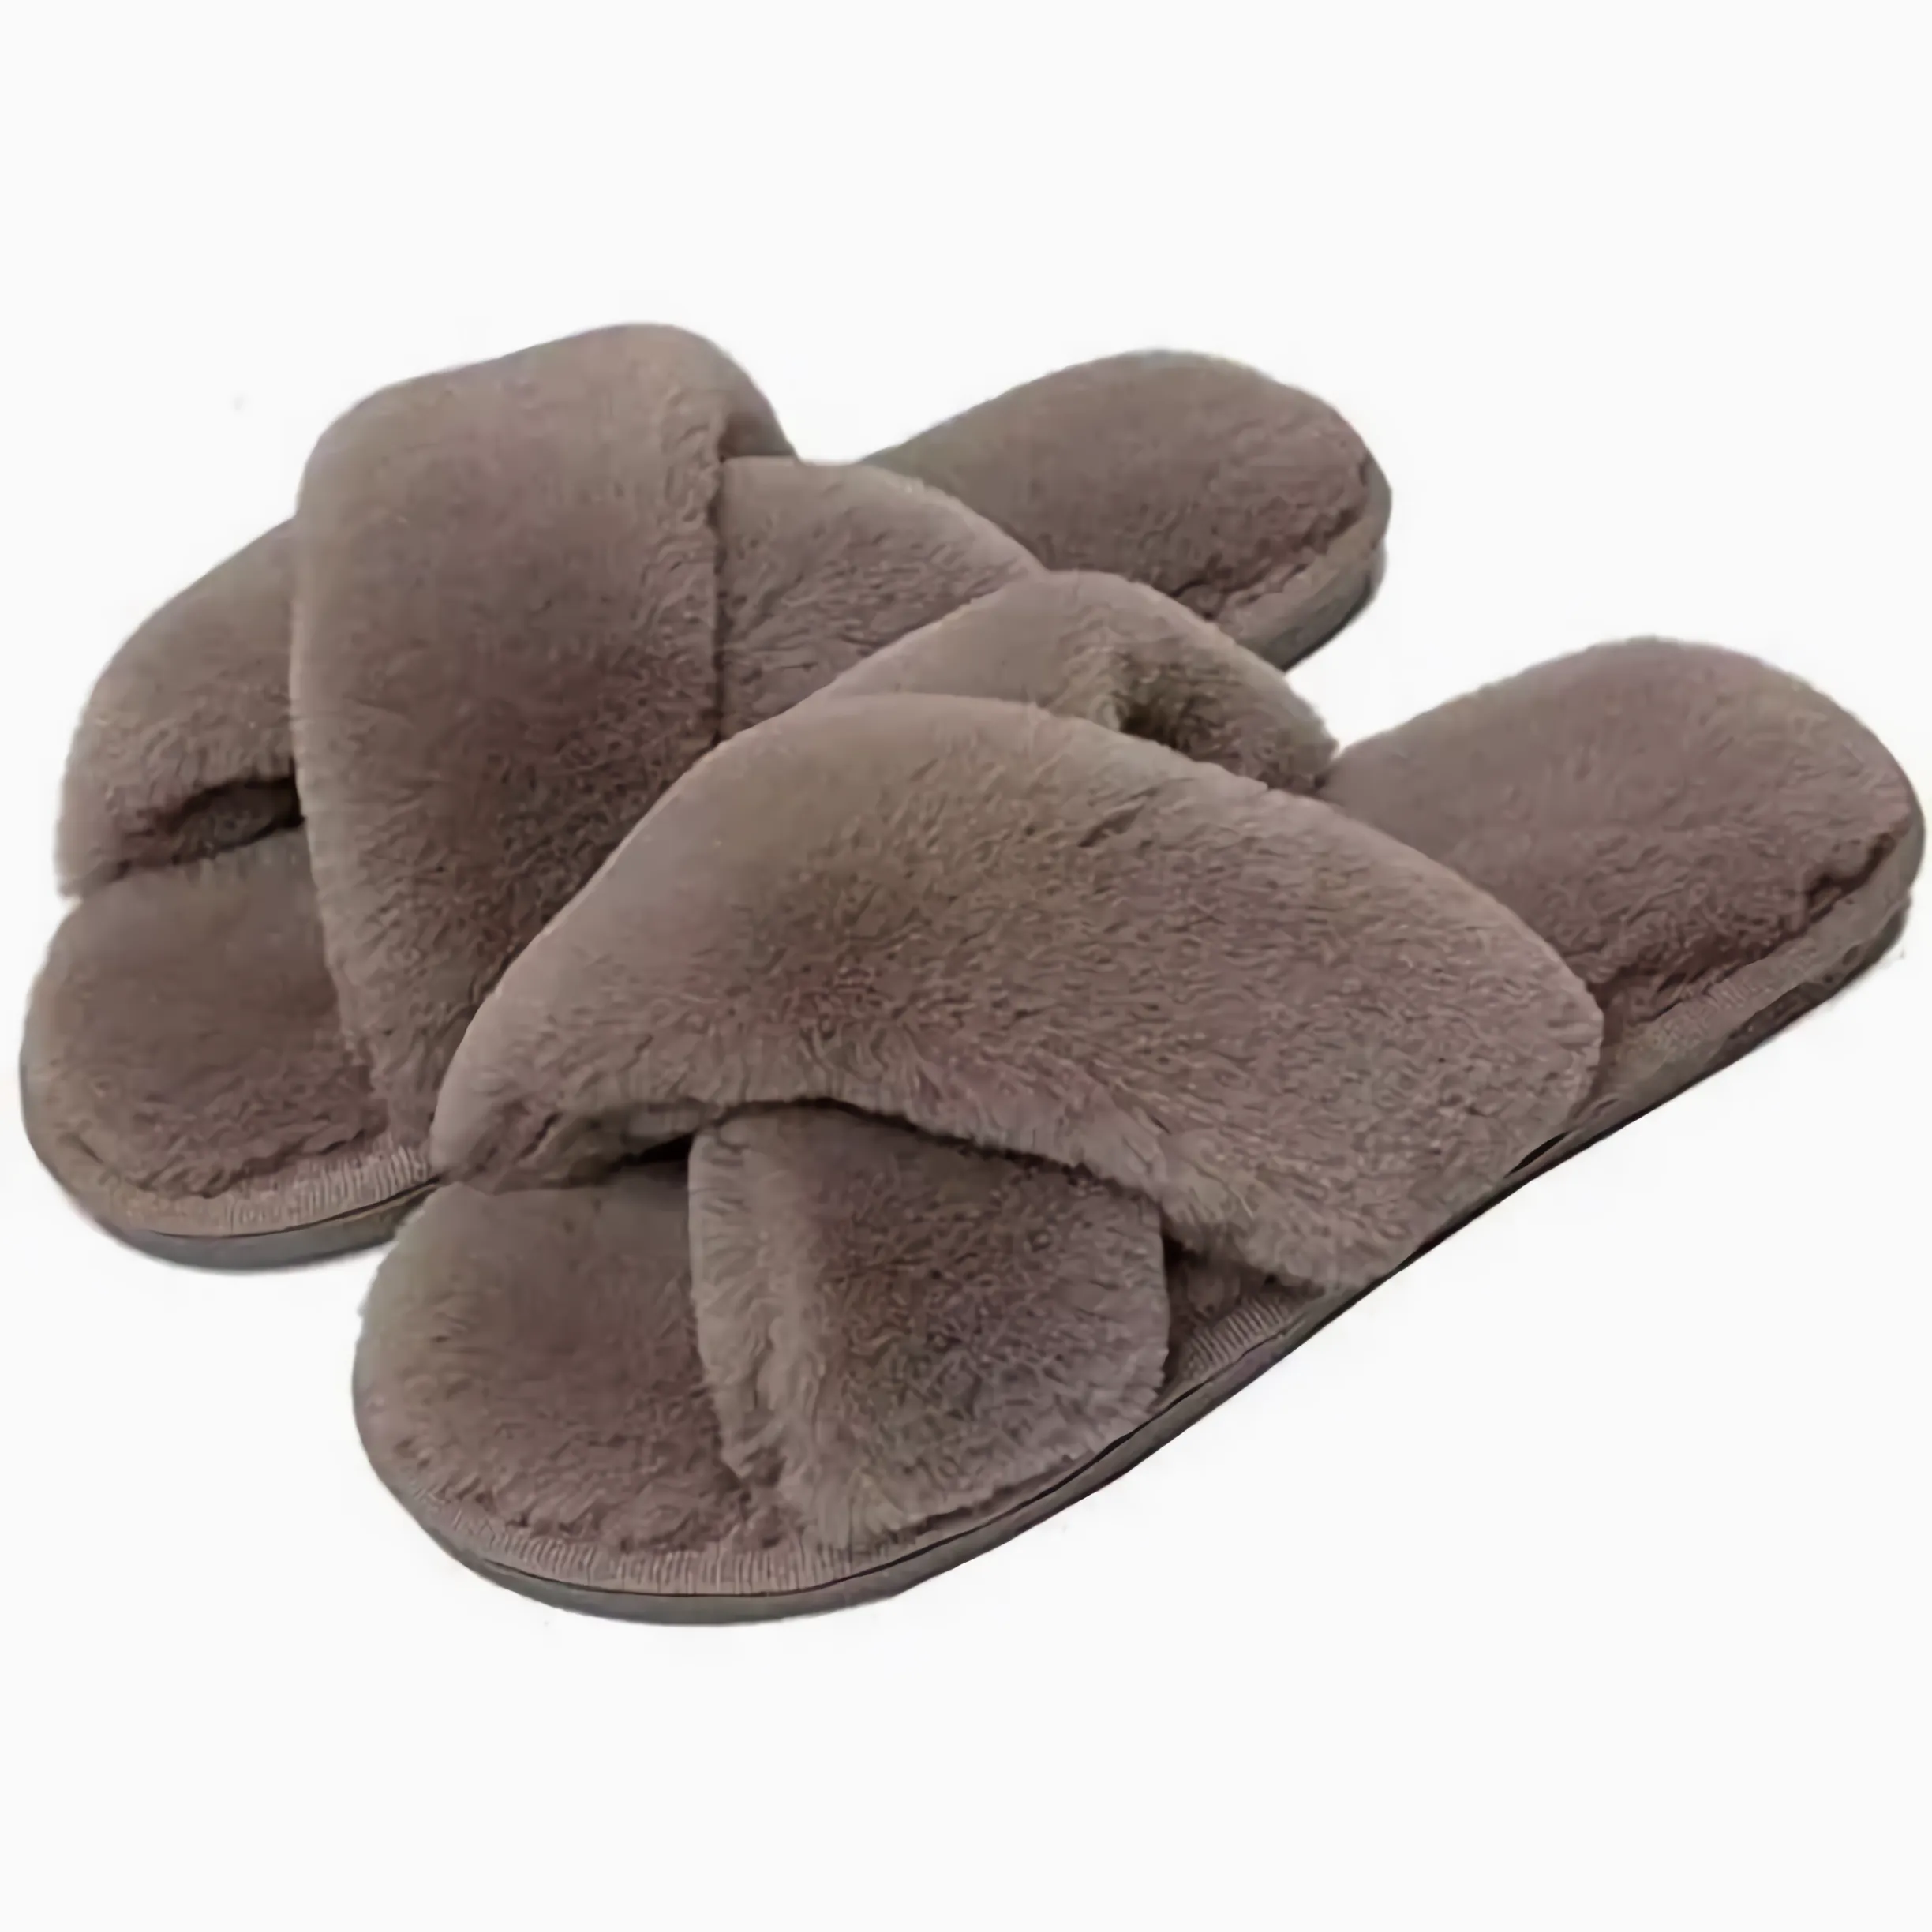 Womens Soft Plush Fuzzy Slippers Open Toe Warm Comfy Indoor Outdoor ...